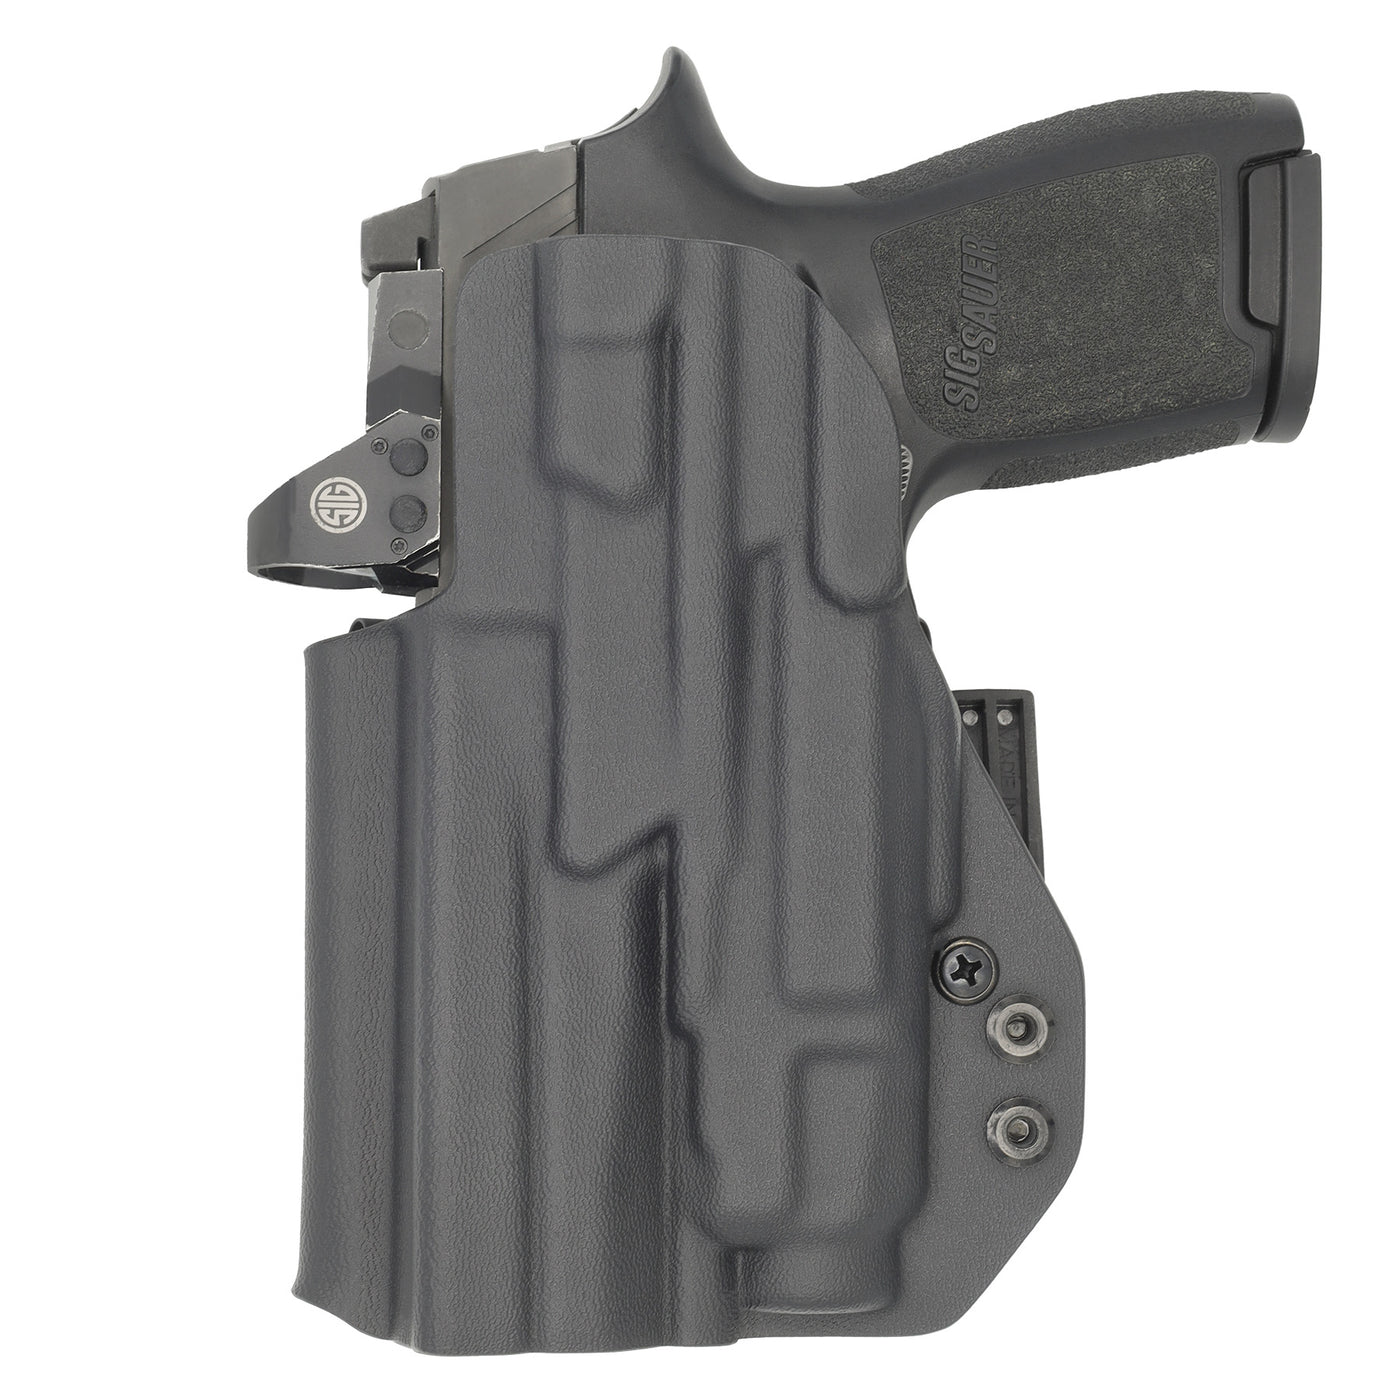 C&G Holsters Quickship IWB ALPHA UPGRADE Tactical Sig P320/c Streamlight TLR7/a in holstered position back view